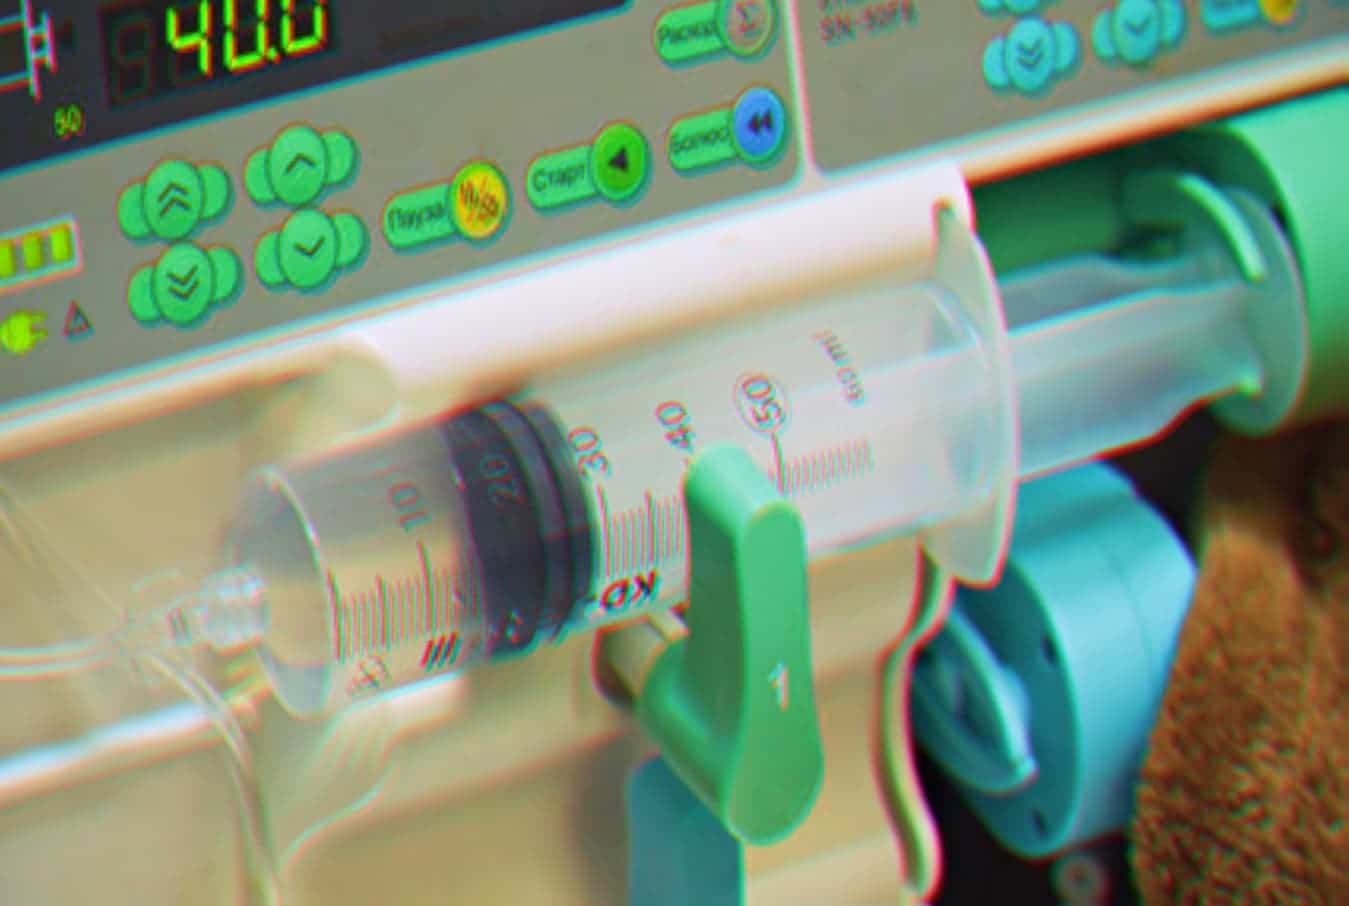 Vulnerable infusion pumps can be remotely accessed to change dosages